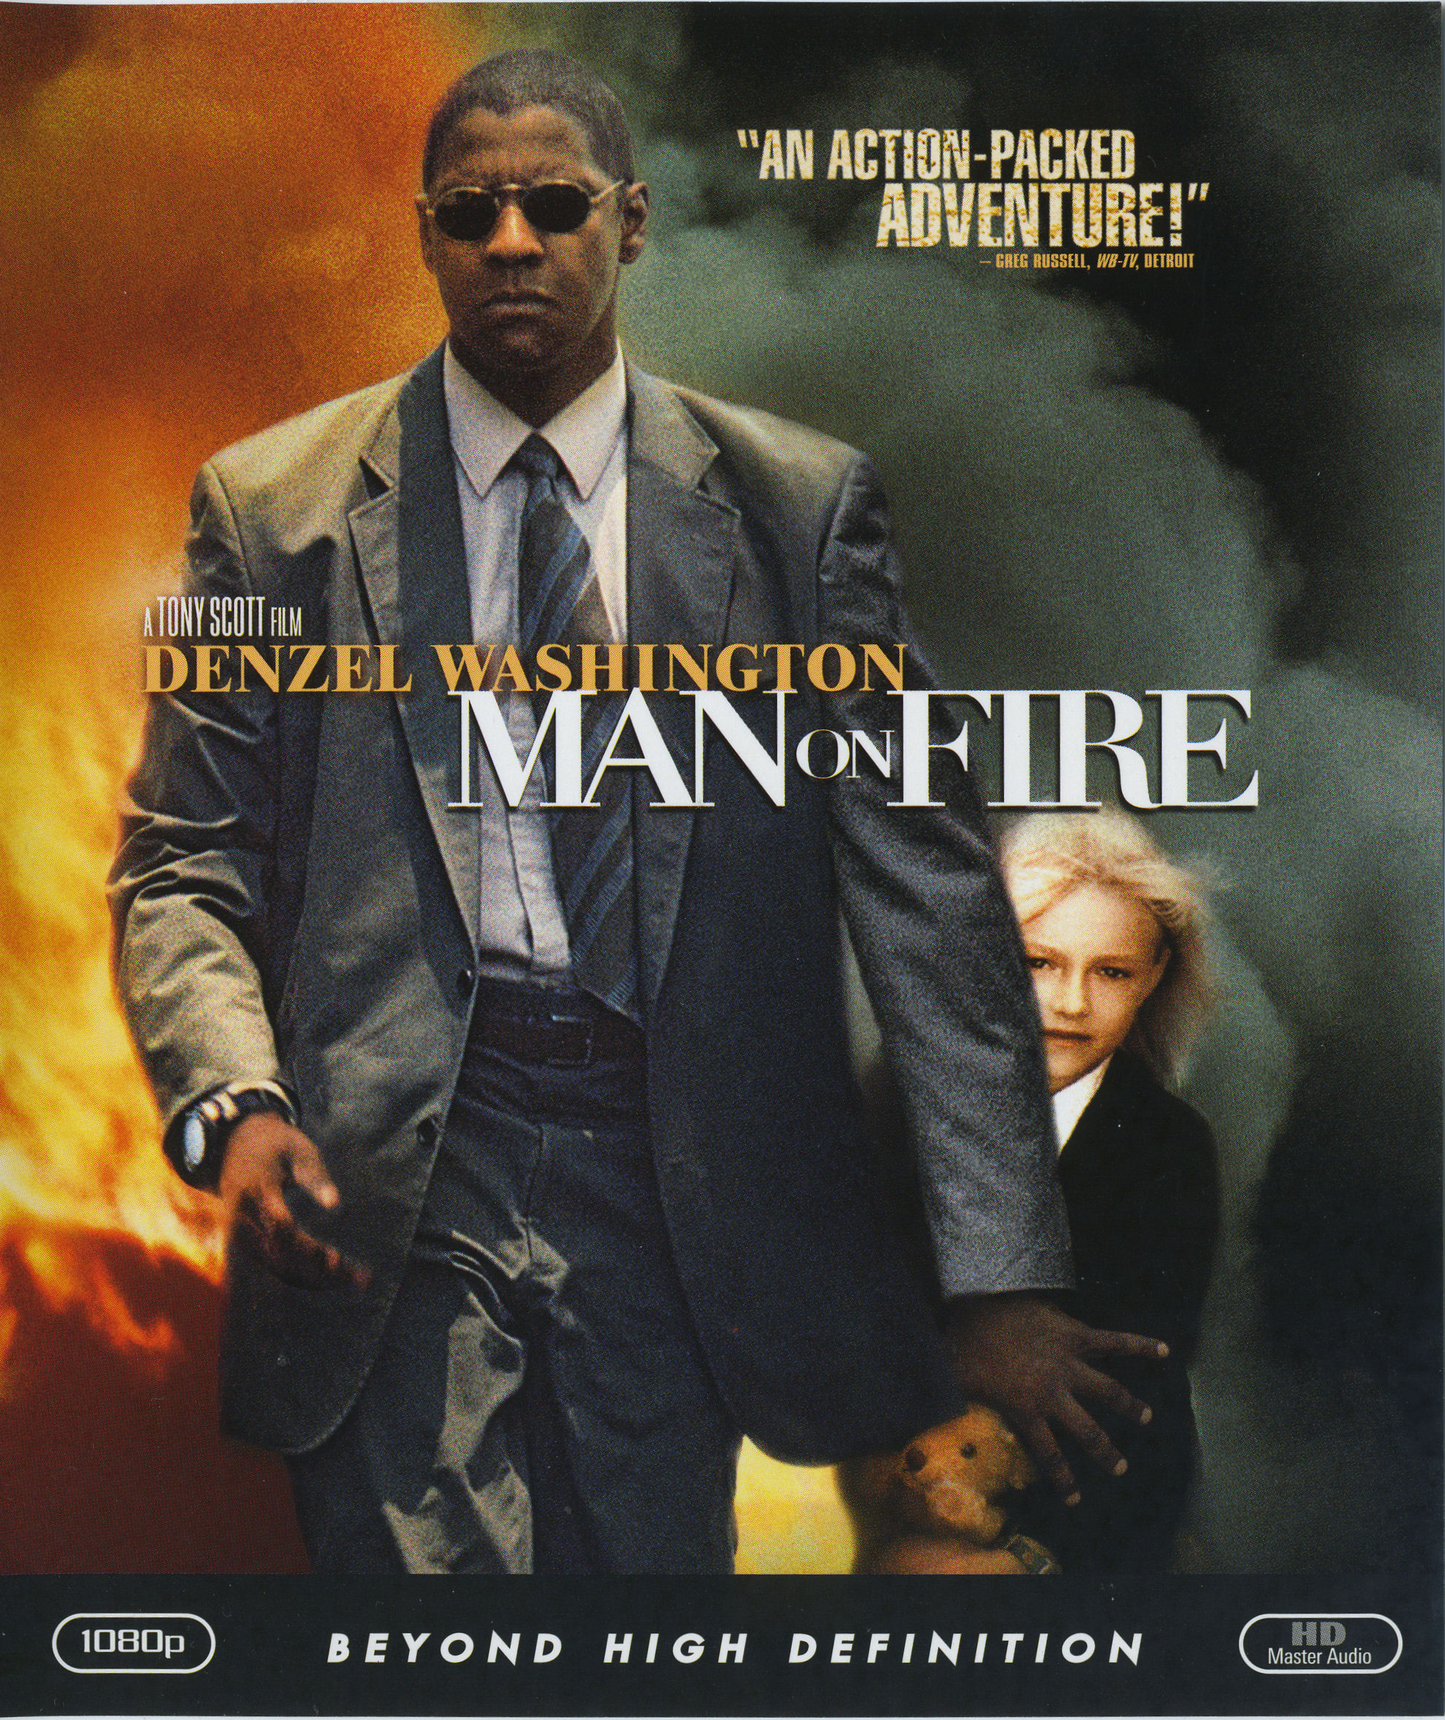 Man On Fire - Blu-ray Action/Adventure 1987 R